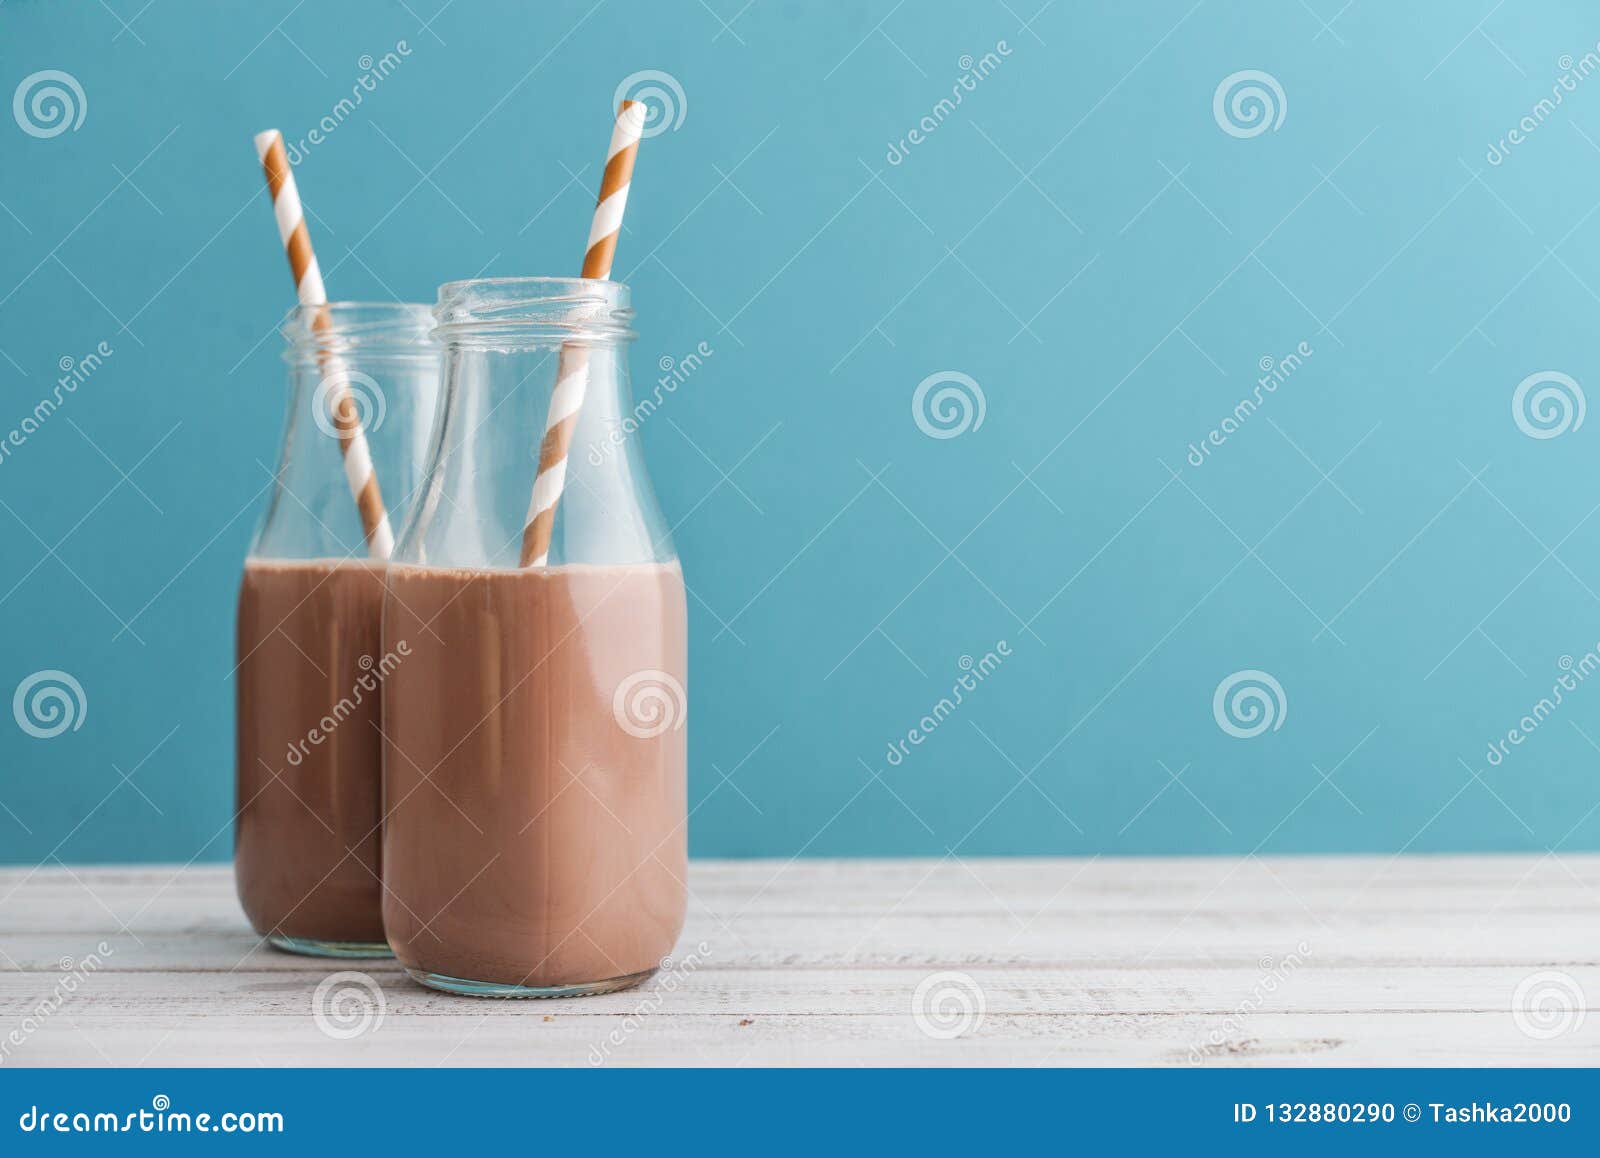 Two bottles chocolate milk stock photo. Image of natural - 132880290